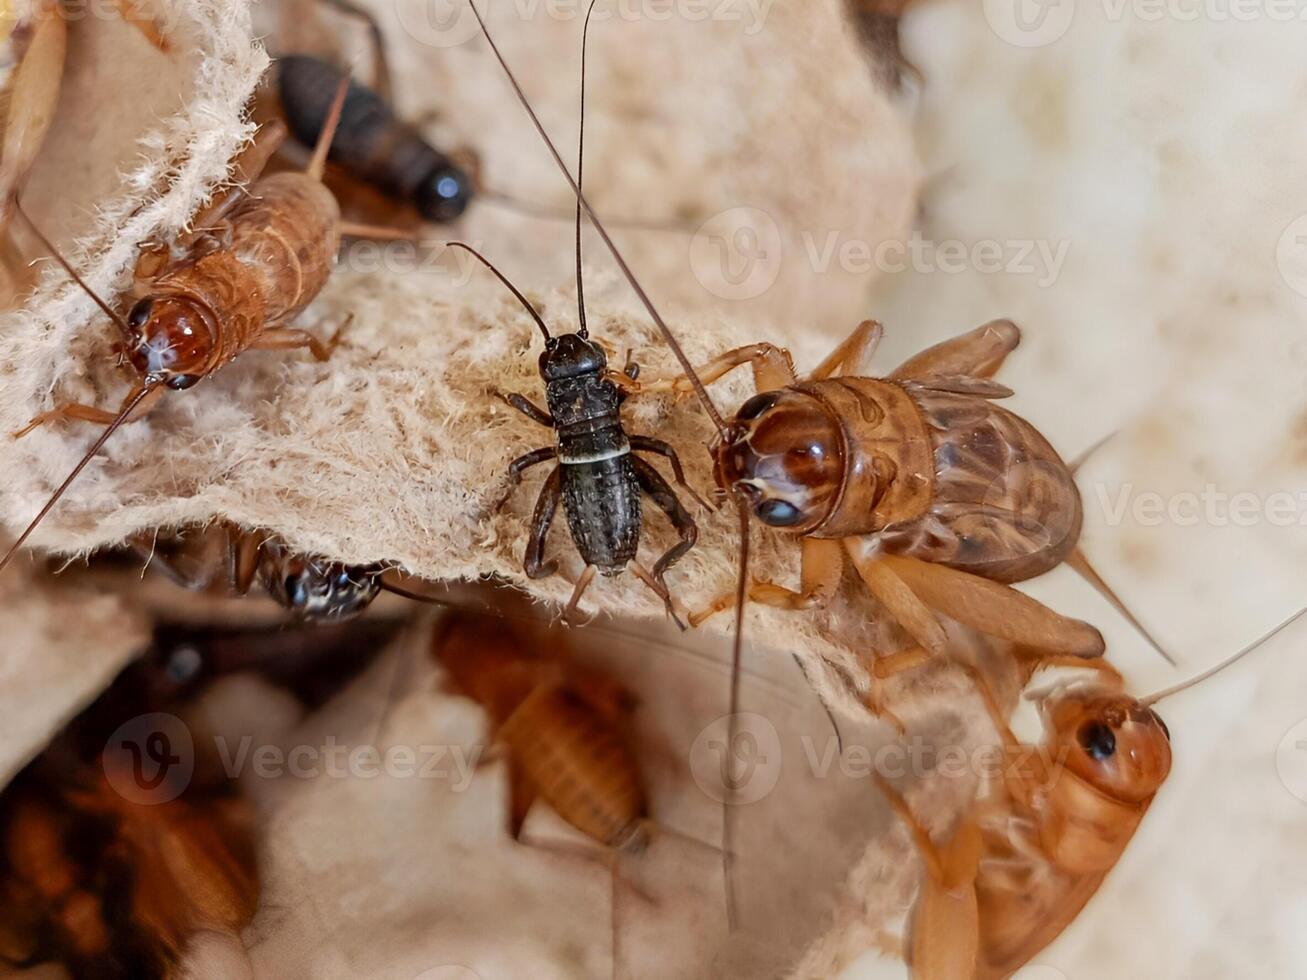 Detail of the portrait of the house cricket where the eggs are wrapped. can be used for educational purposes, entomology research, and, biology presentations. photo